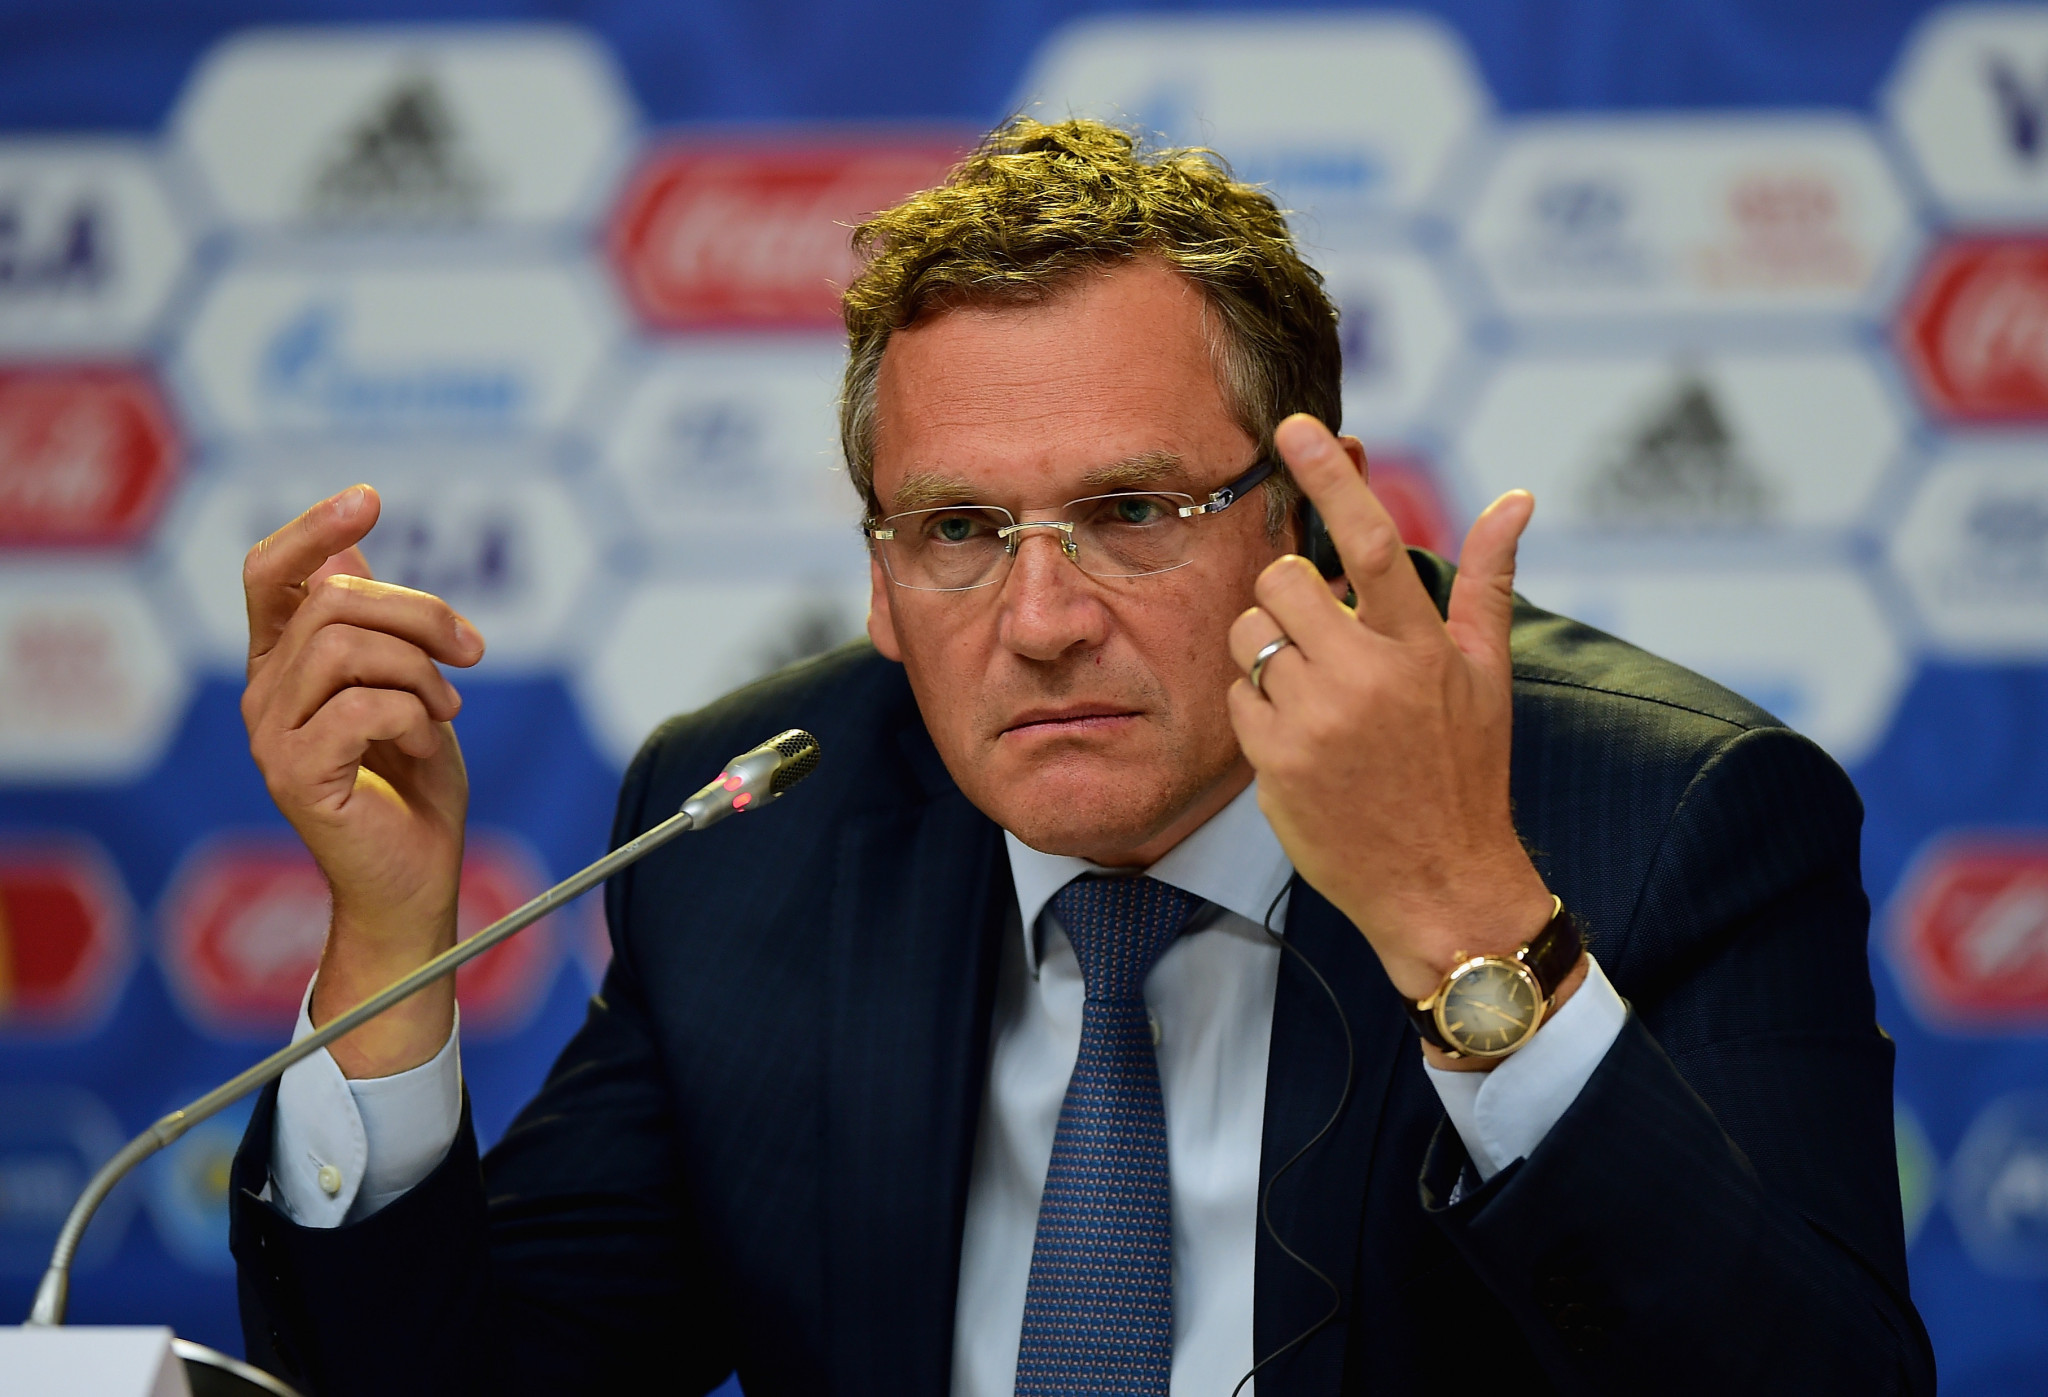 Jérôme Valcke, who was also named in the Panama Papers, was sacked by FIFA in 2016 ©Getty Images